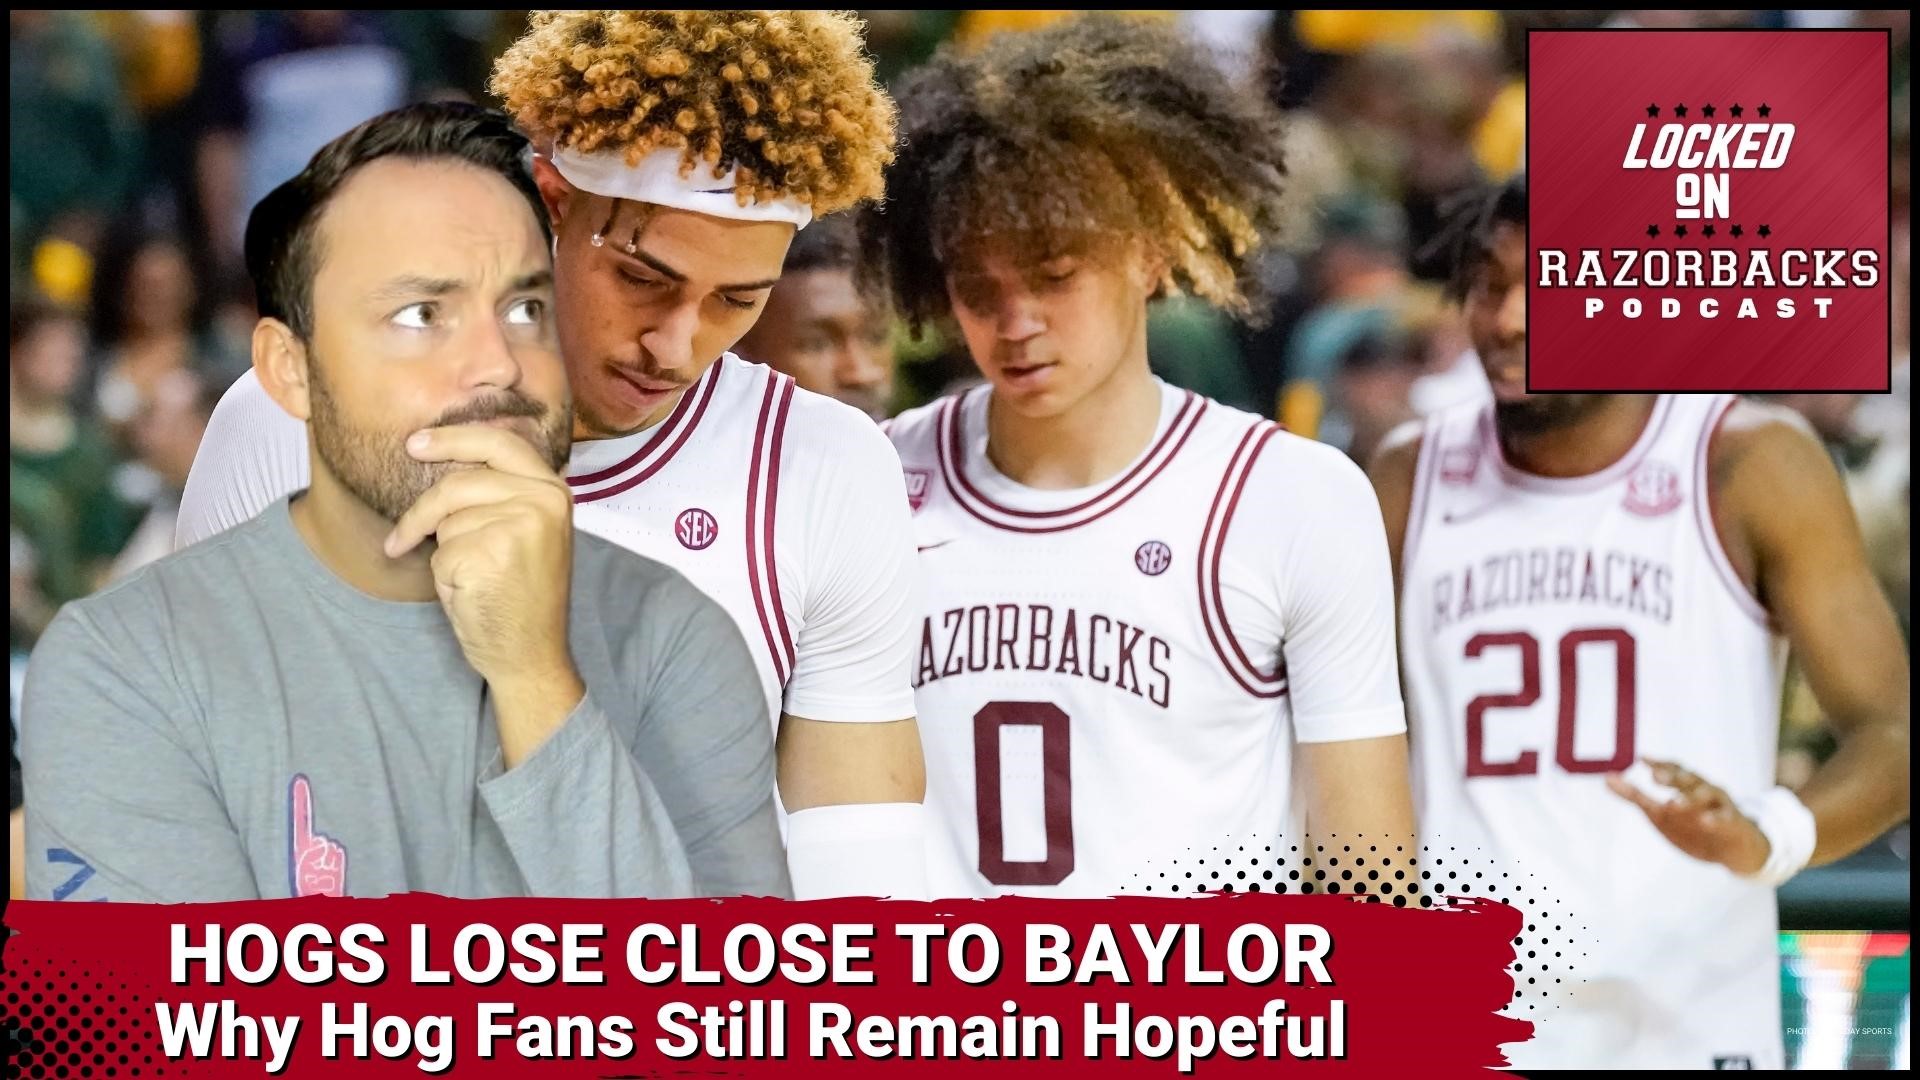 Even though the Hogs lost by 3, Hog fans still are feeling somewhat encouraged by what the rest of the season may hold.